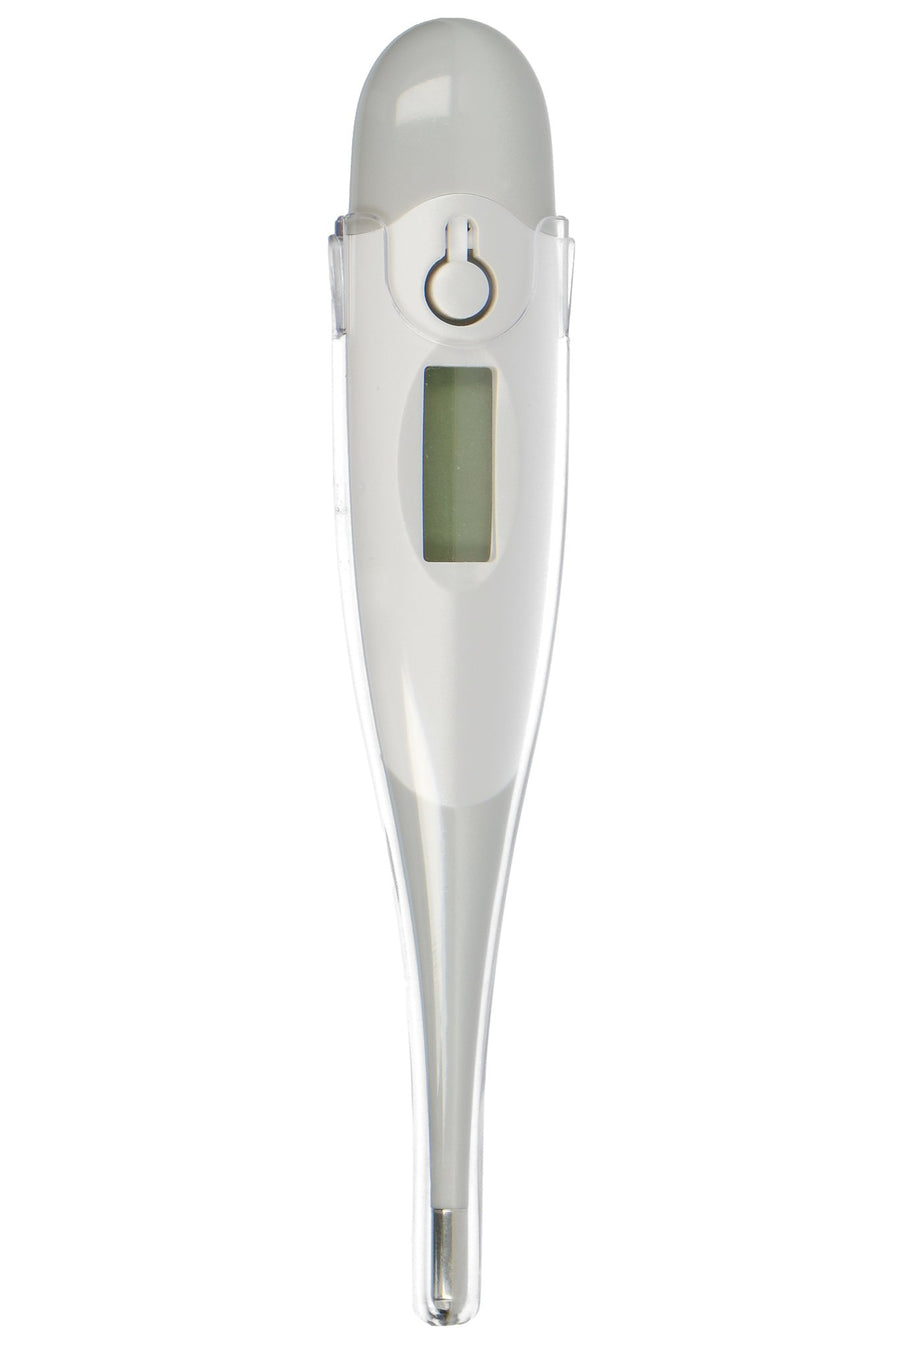 DIGITALE THERMOMETER